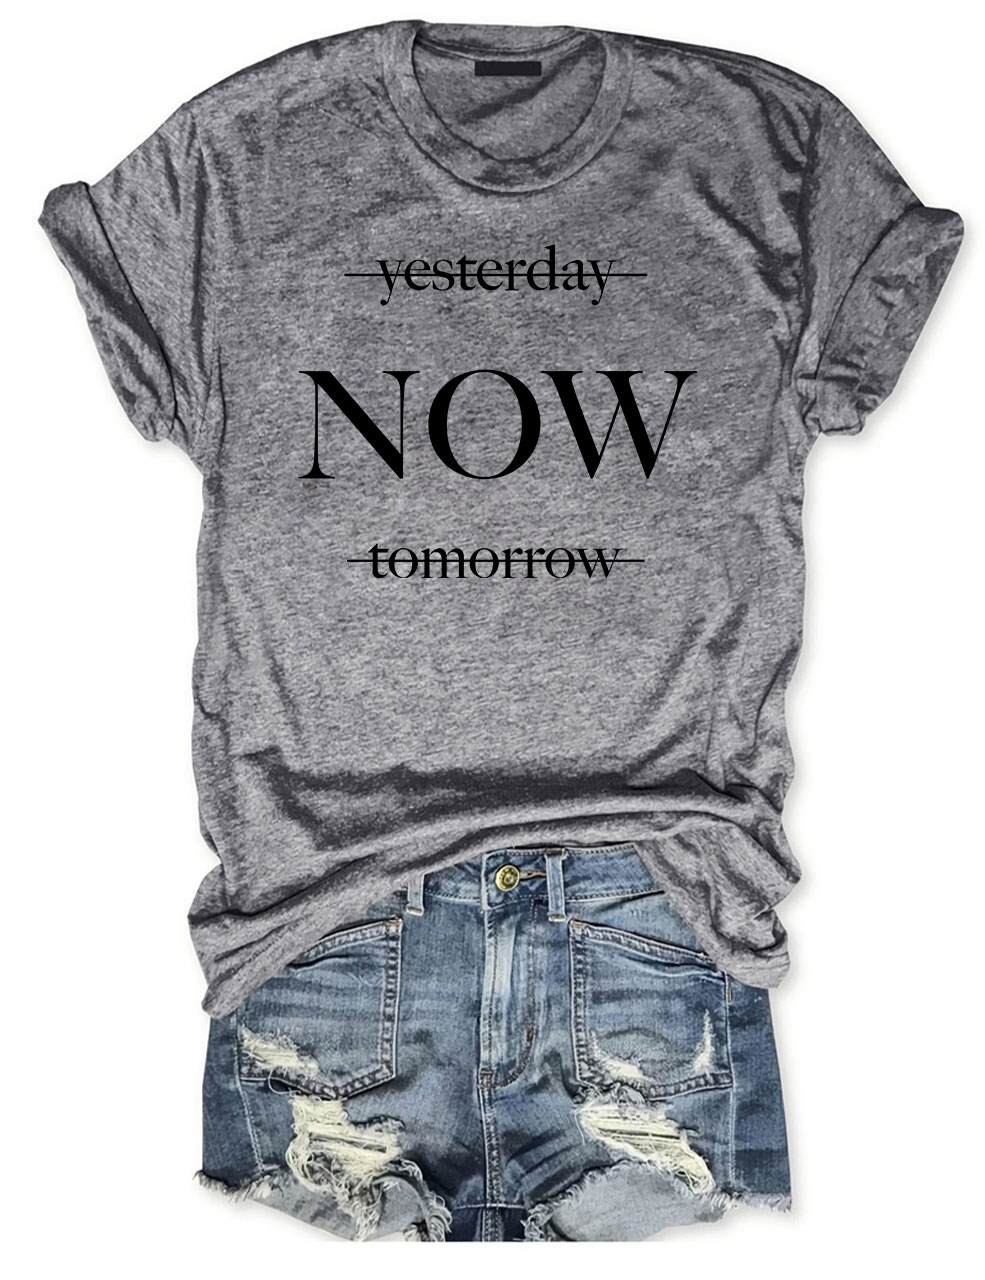 Yesterday Tomorrow Now T-shirt